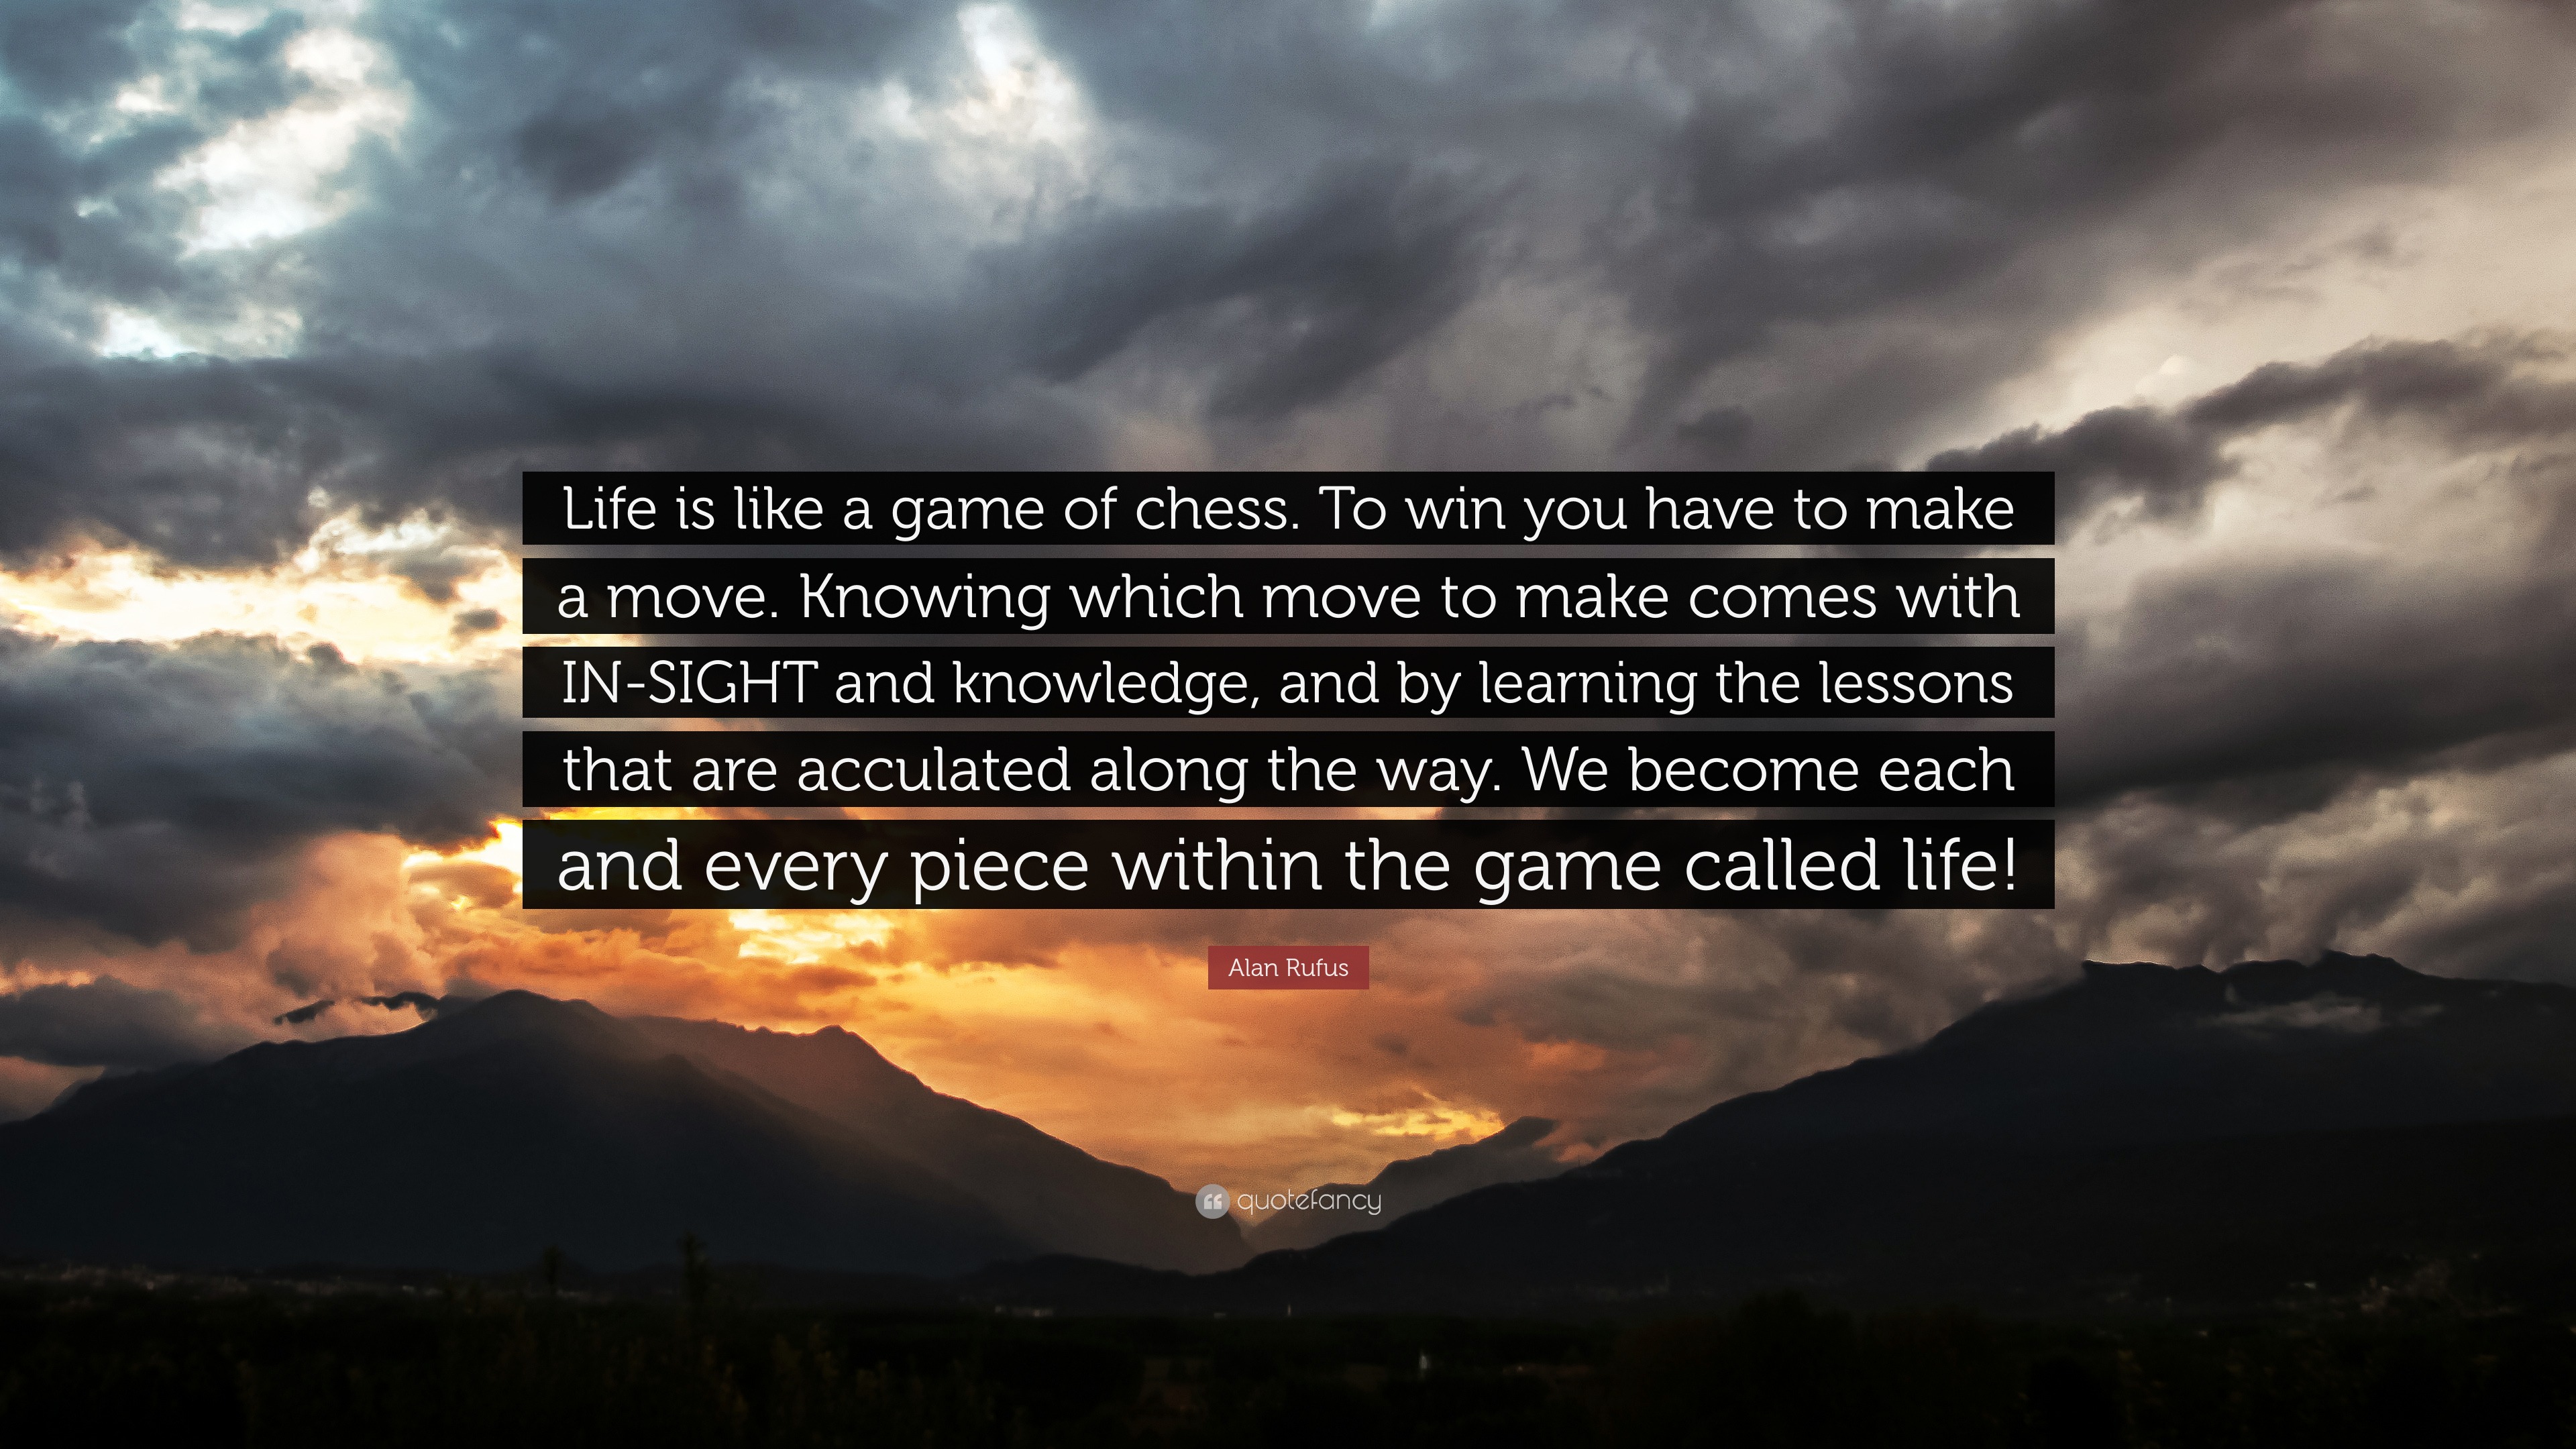 Alan Rufus Quote: “Life is like a game of chess. To win you have